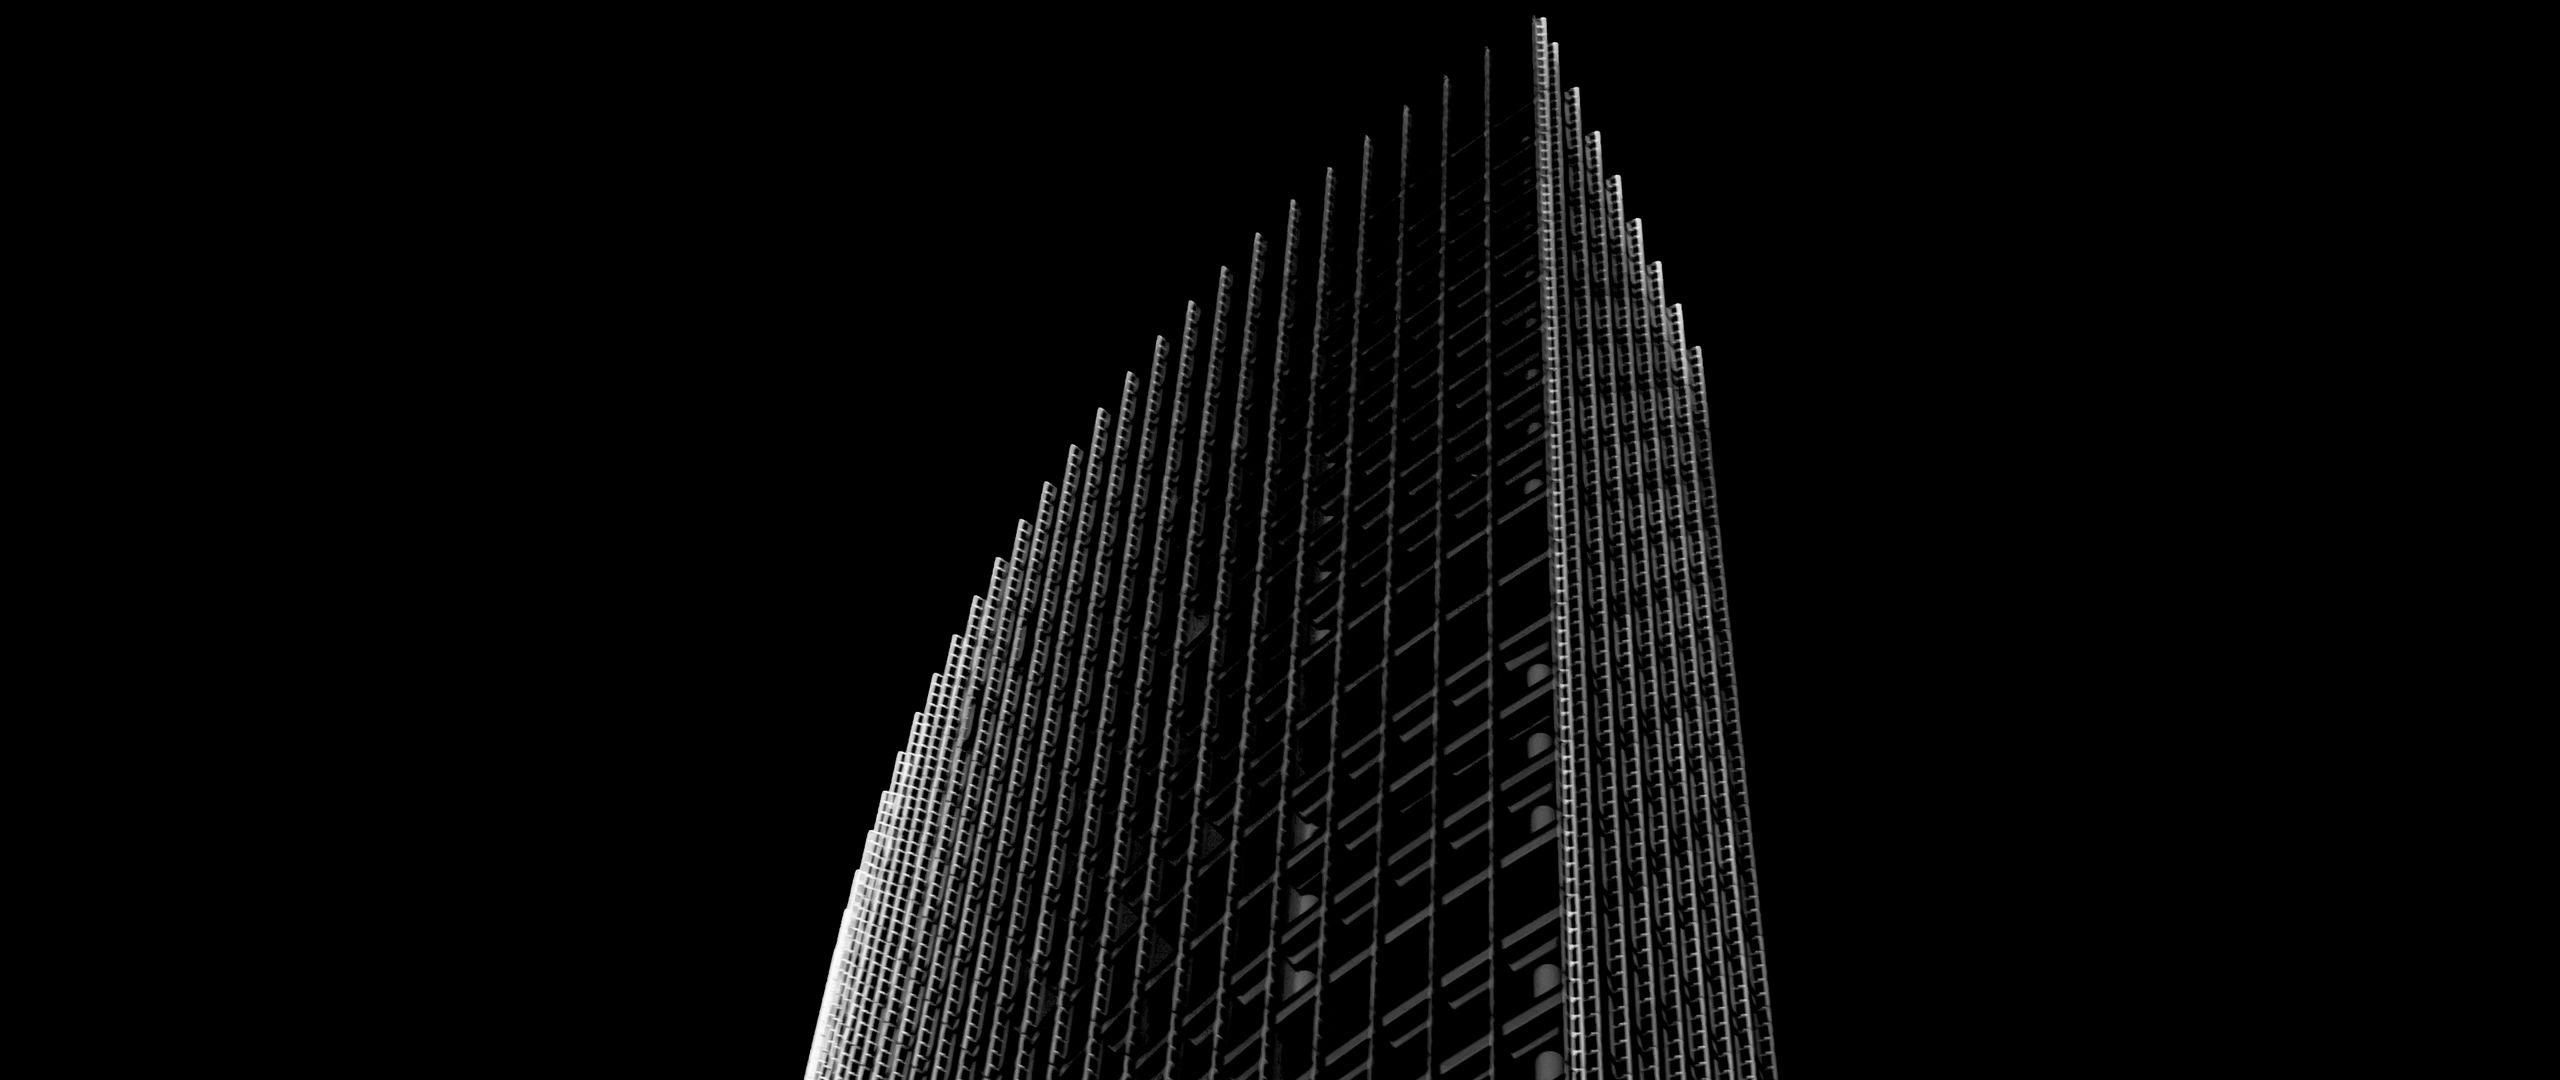 Download wallpapers 2560x1080 skyscraper, building, black and white, minimalism, architecture, facade dual wide 1080p hd backgrounds